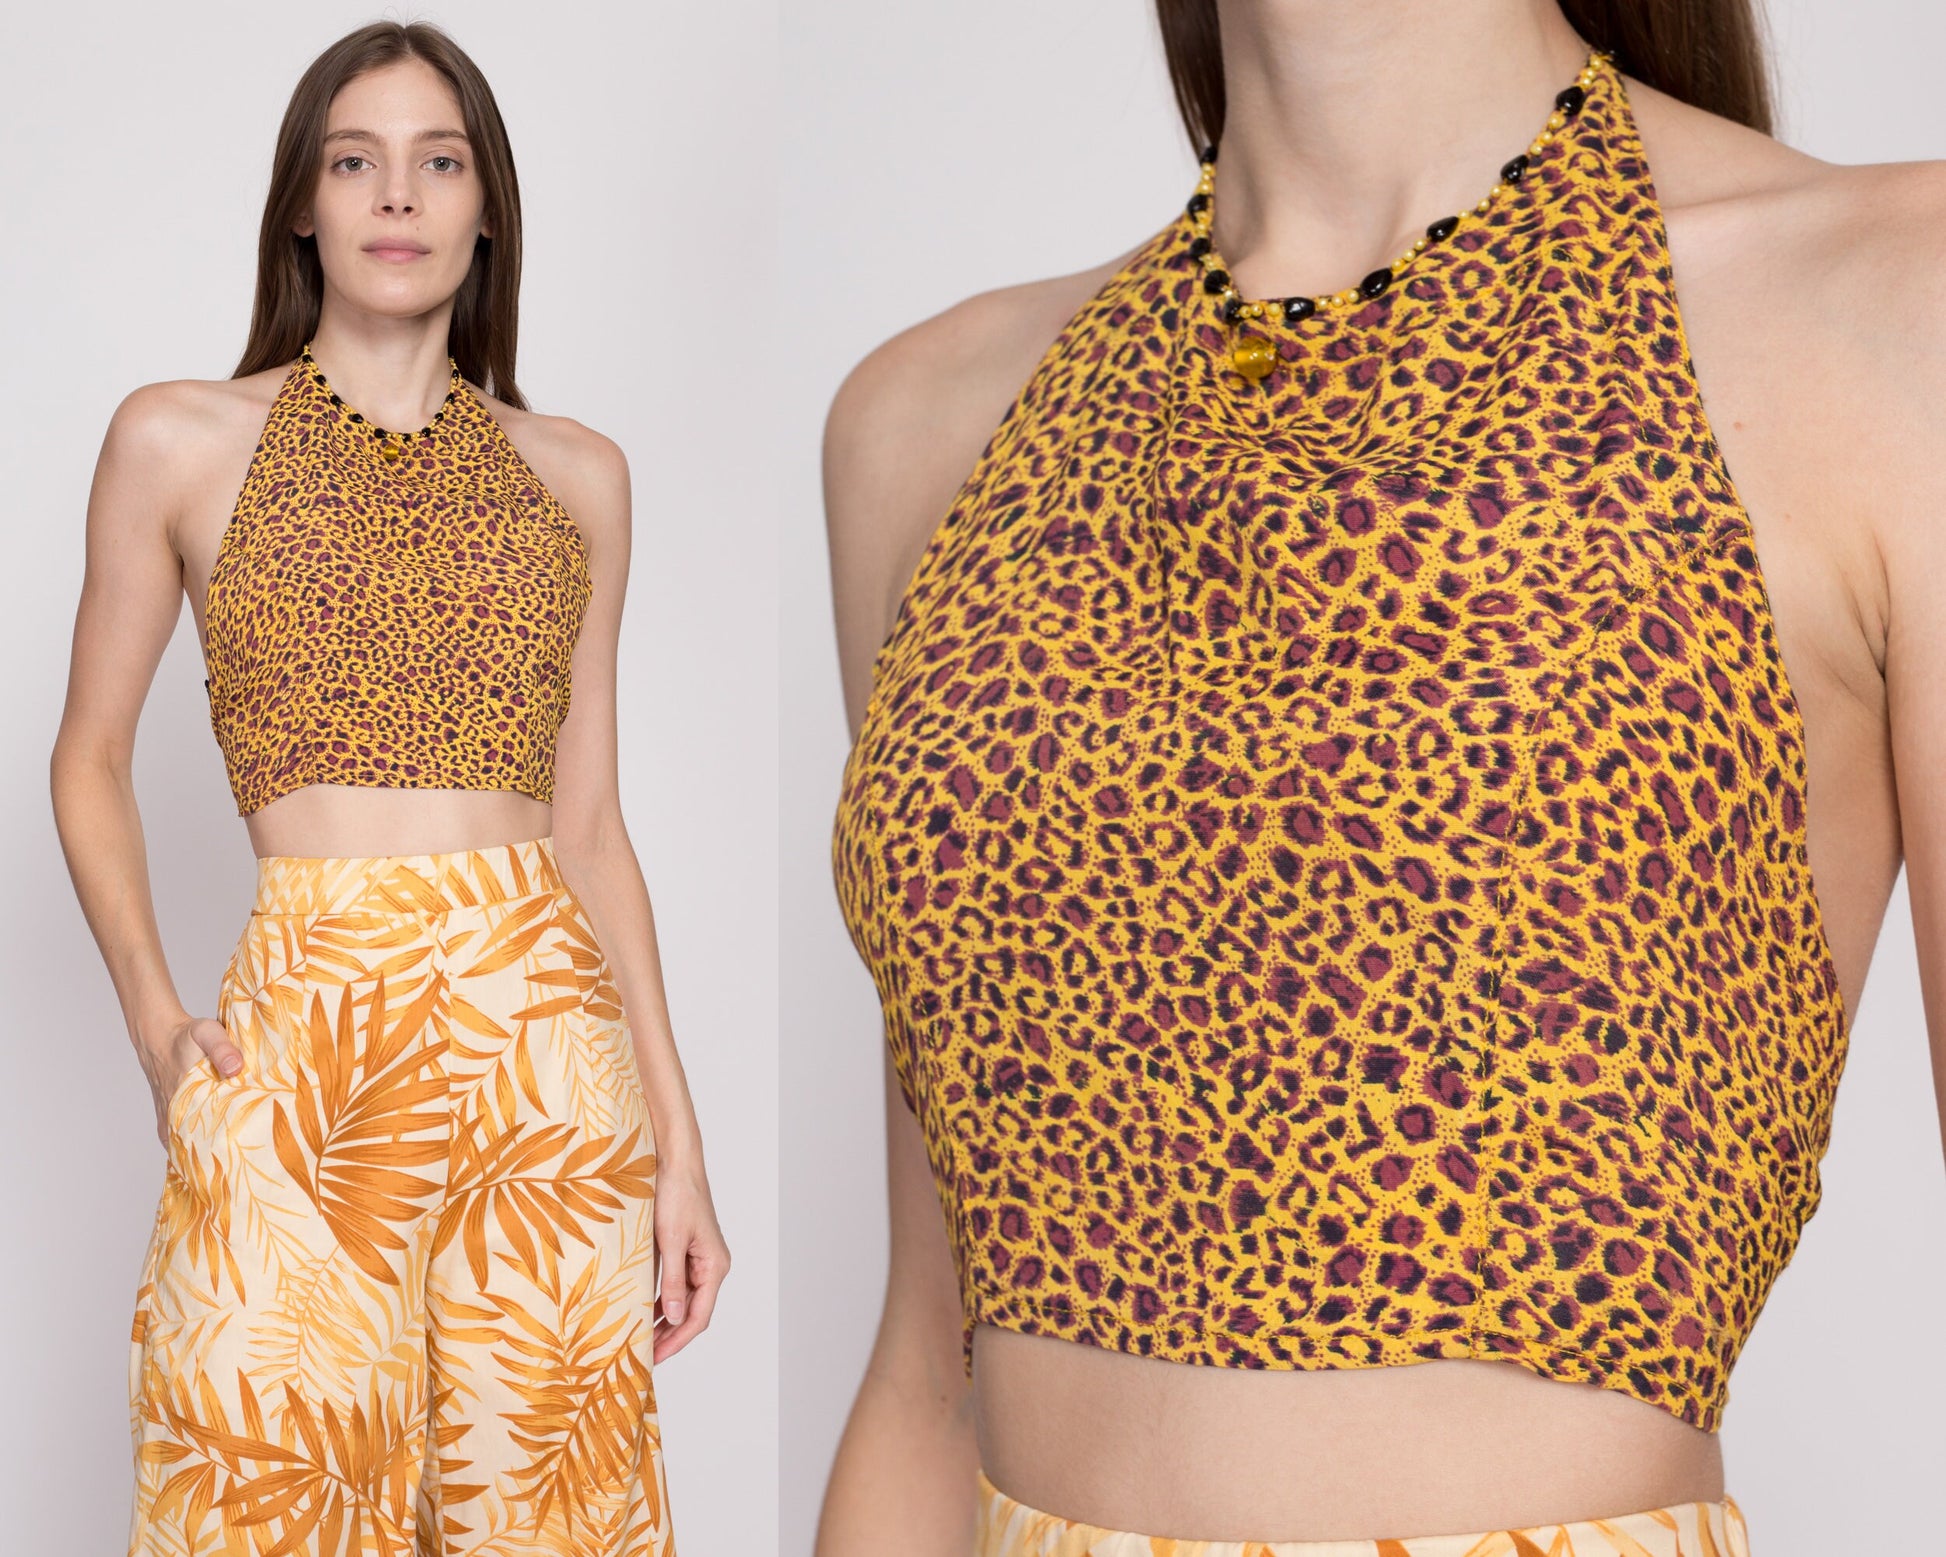 XS-S| 90s Leopard Print Beaded Halter Crop Top - XS to Small | Vintage Boho Jungle Animal Print Cropped Blouse